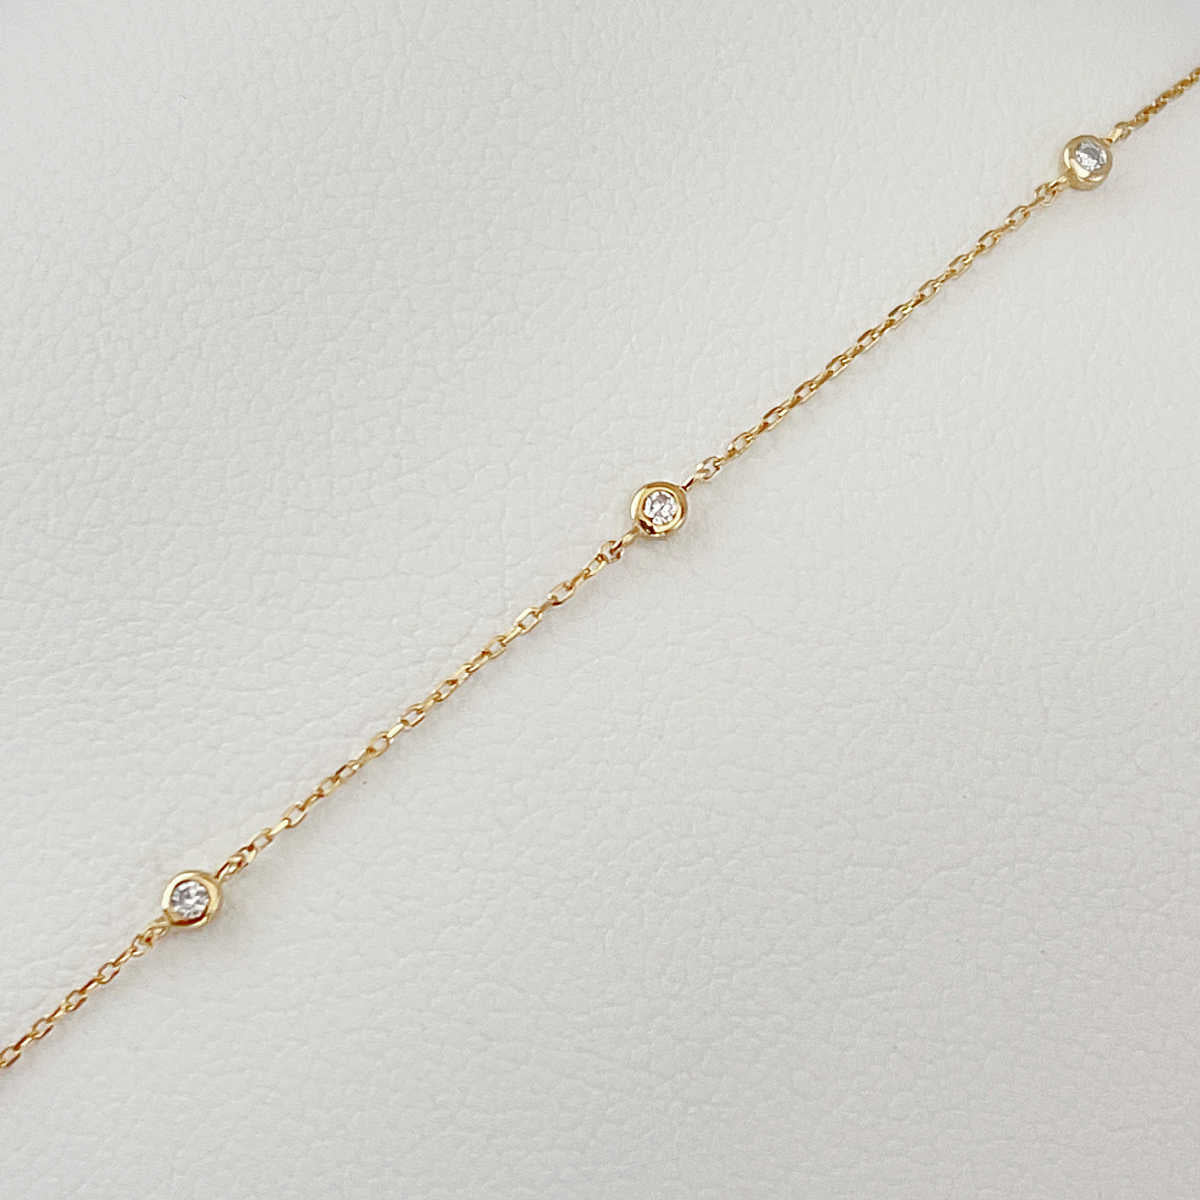 Diamond Station Necklace | Diamonds by the Yard Style Dainty Gold Necklace | 14k Gold Layered Necklaces from Two of Most